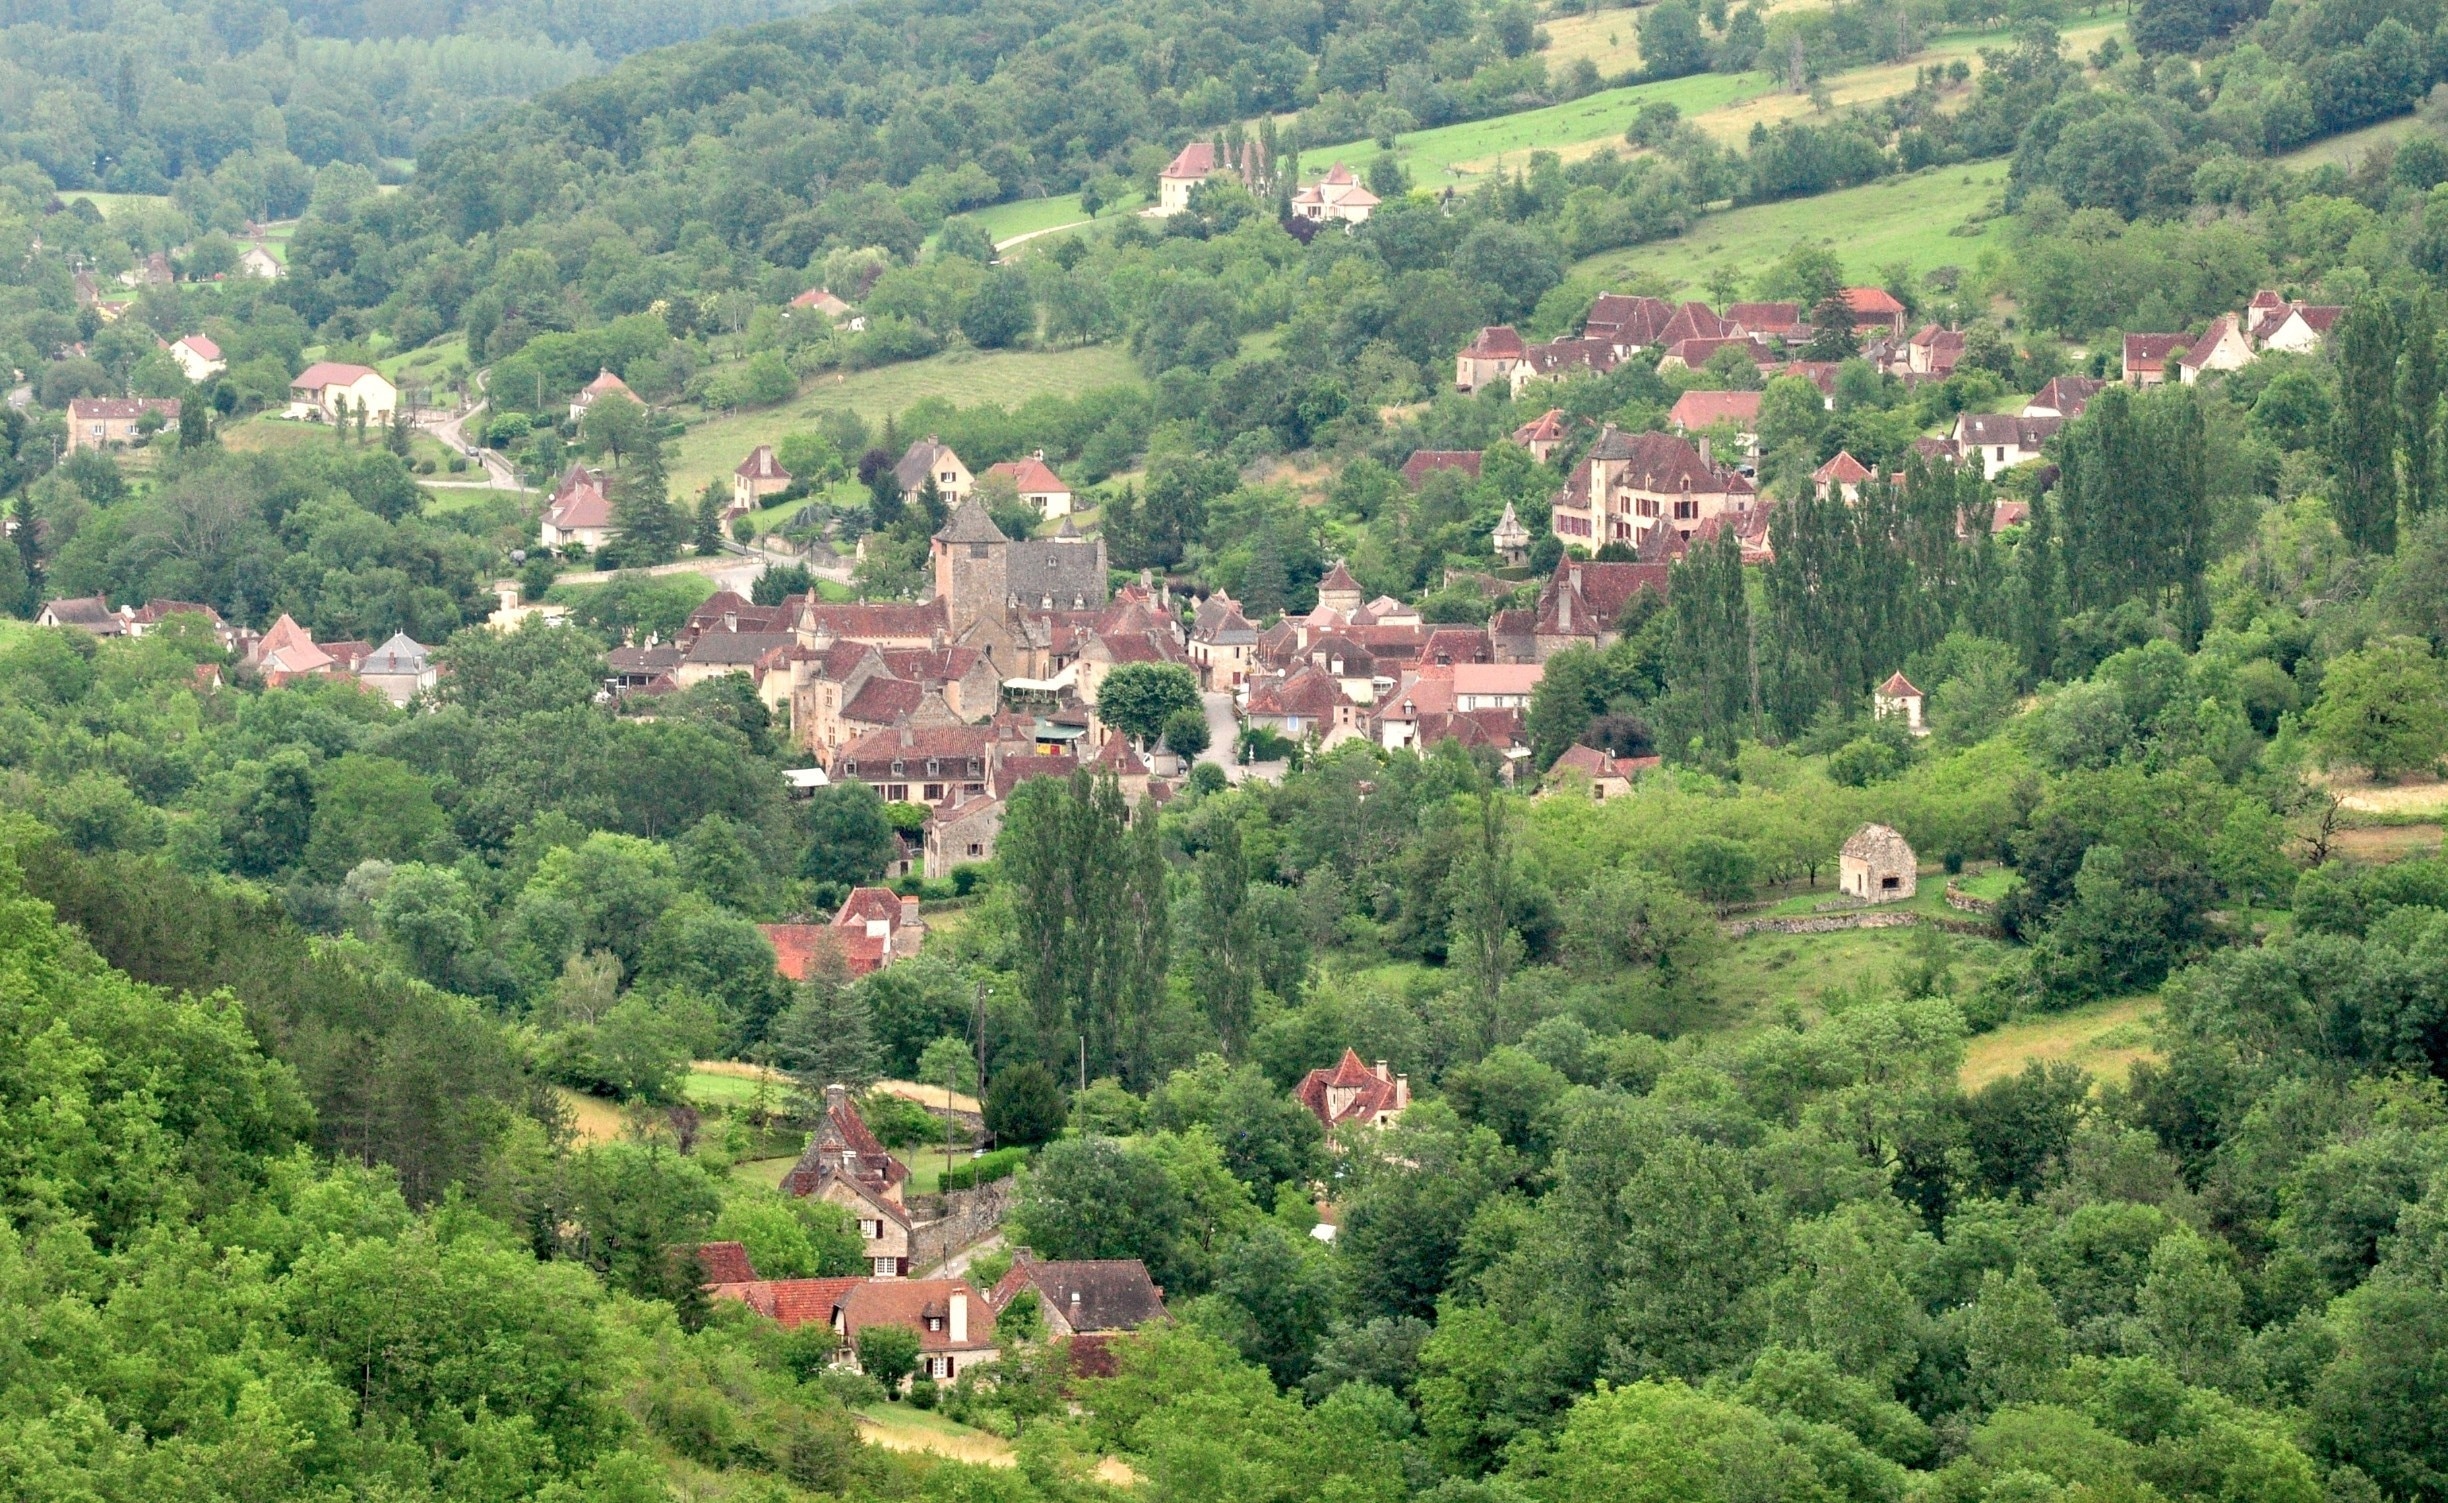 Autoire nestles cosily in a beautiful valley that also features spectacular cliffs and a beautiful waterfall. What better place for one of the most beautiful of the 'plus beaux villages'?